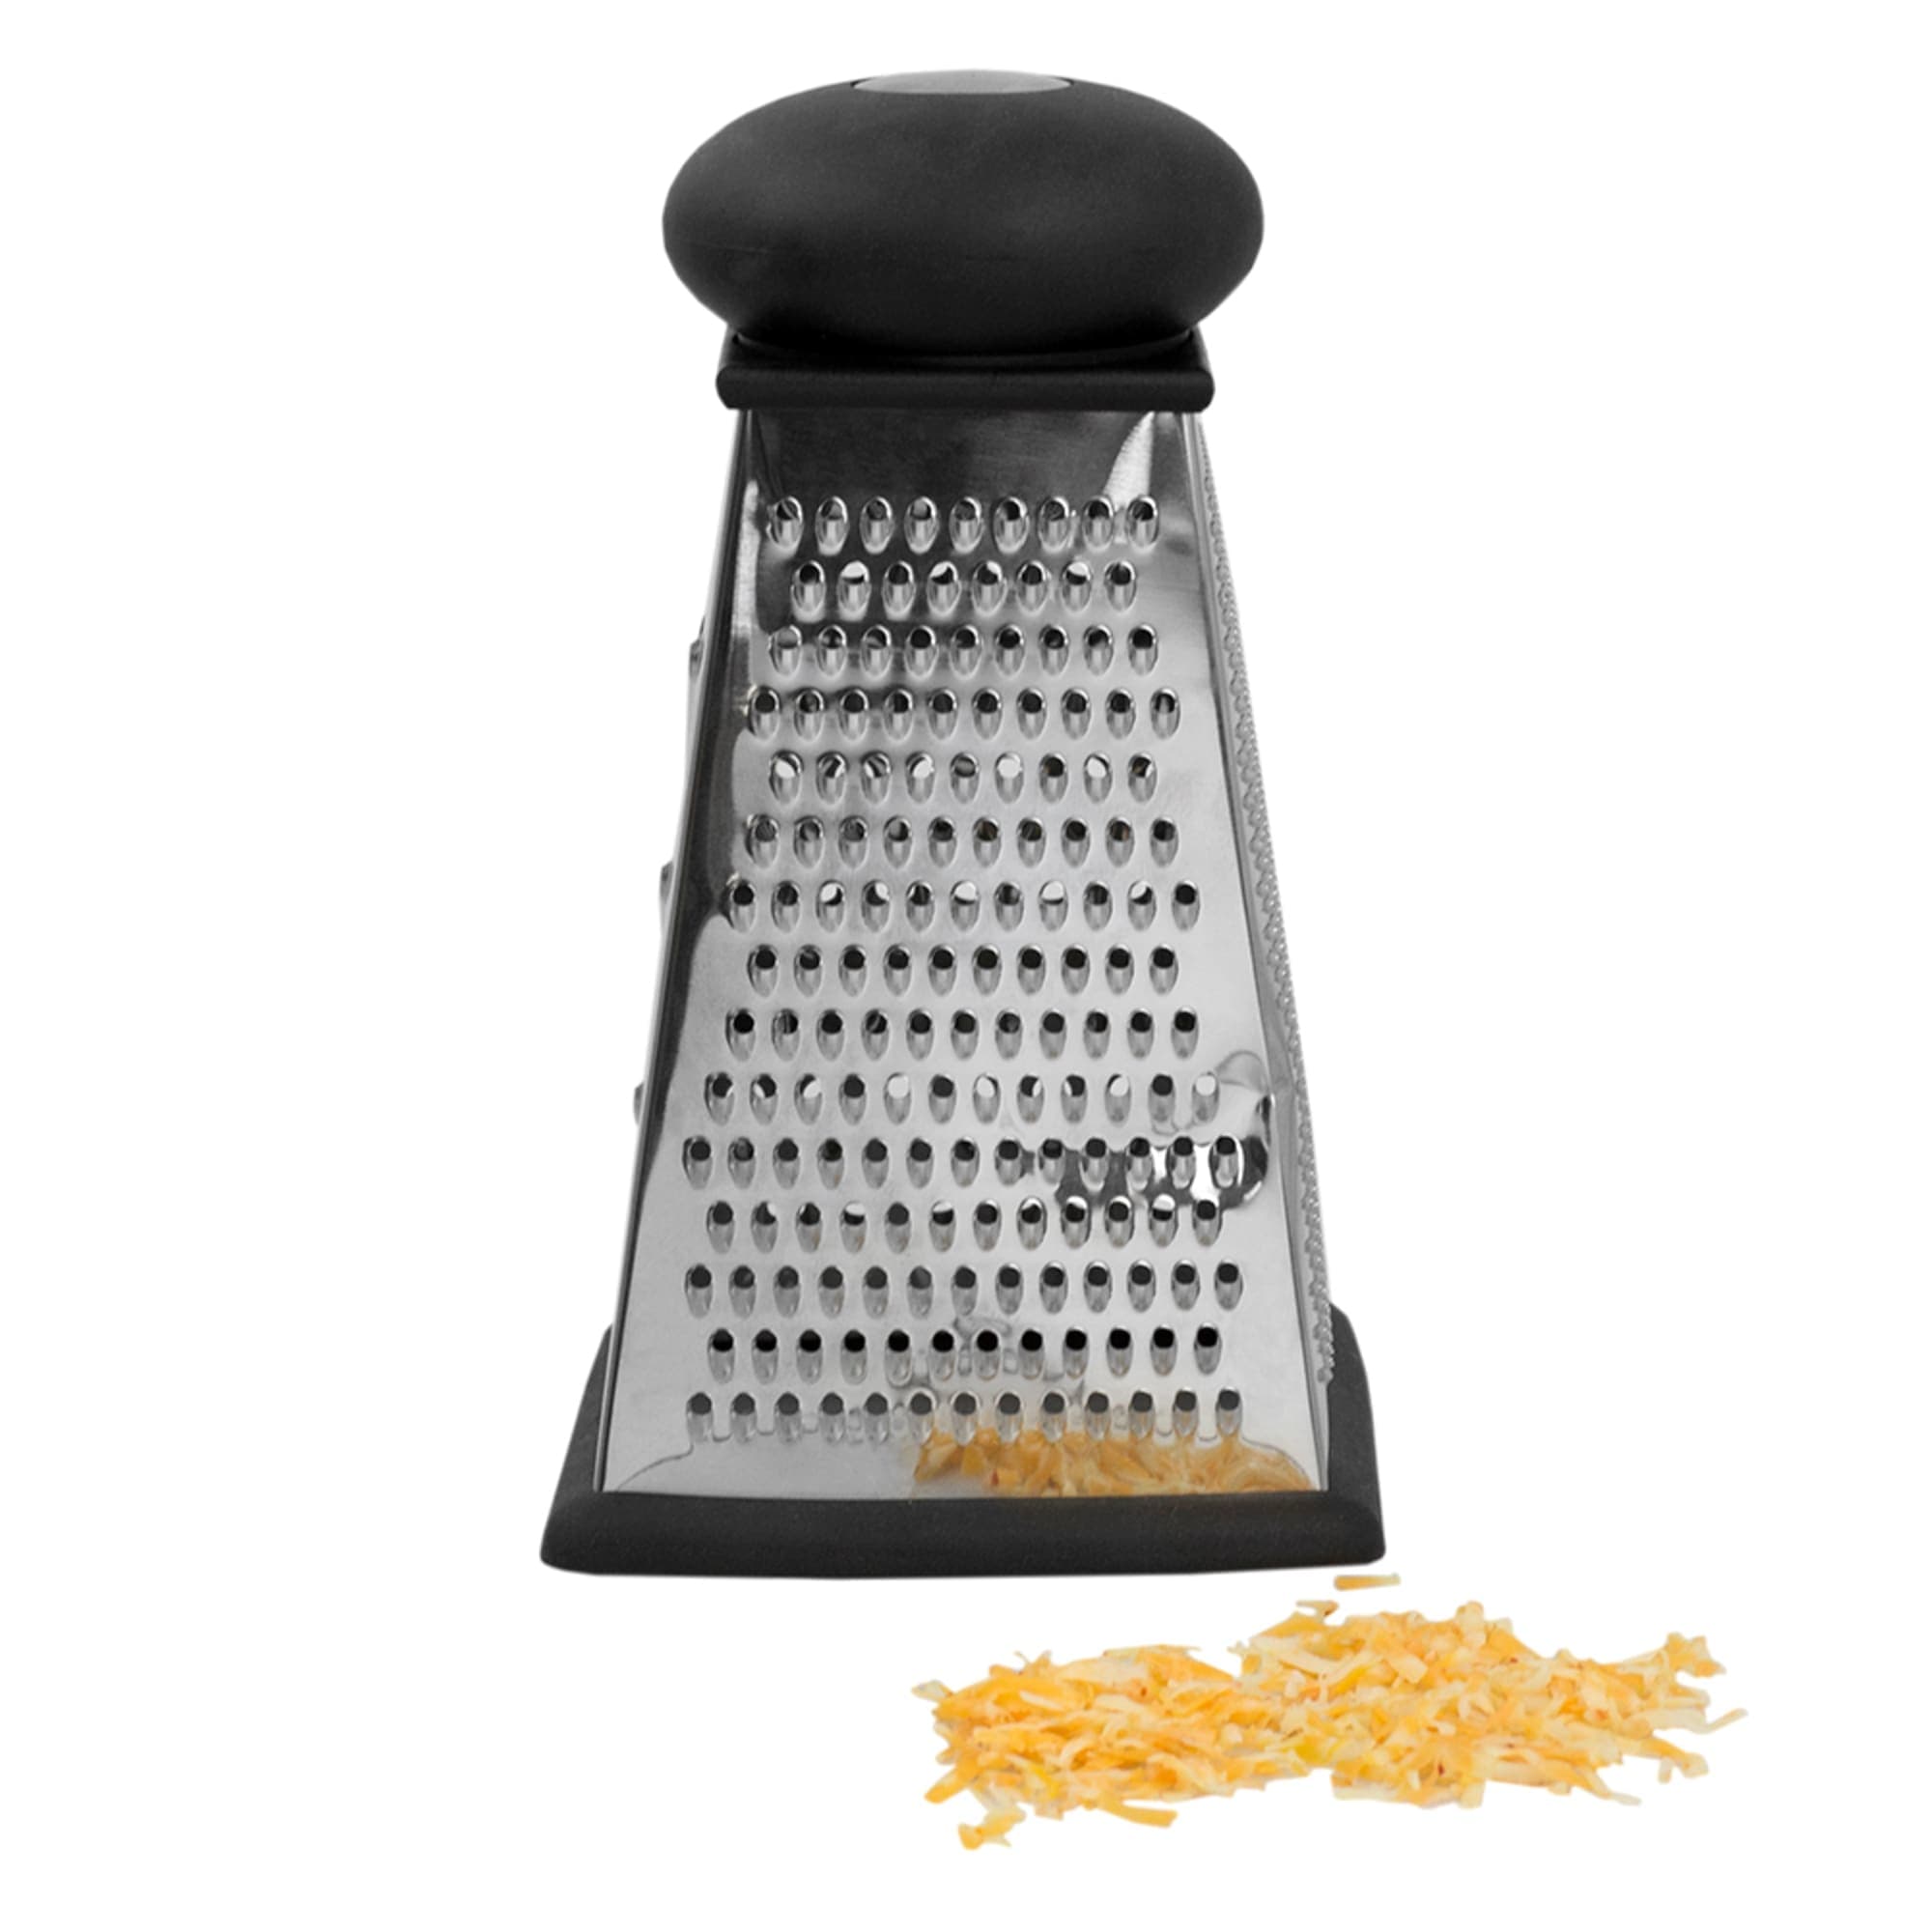 Get-A-Grip® 10 Manual Cheese Grater (GRP-10CG)